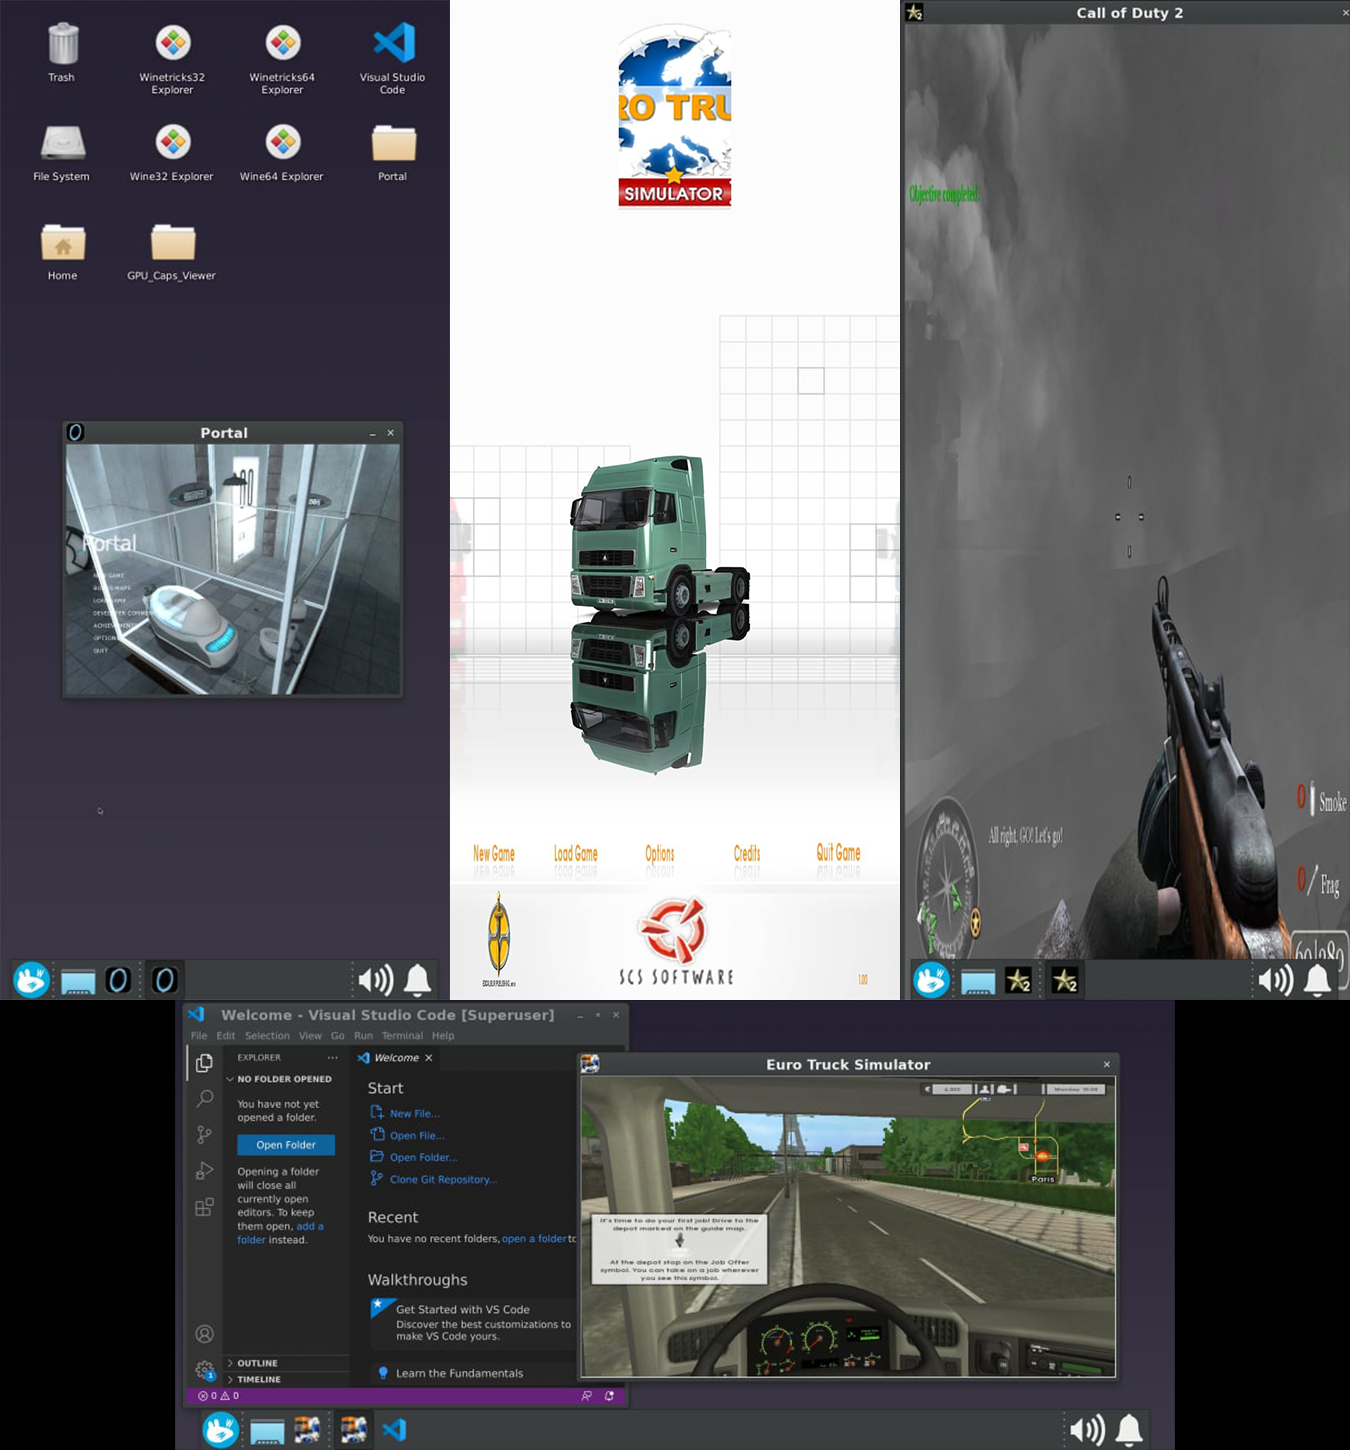 Collage with Call of Duty 2, Euro Truck Simulator, Portal